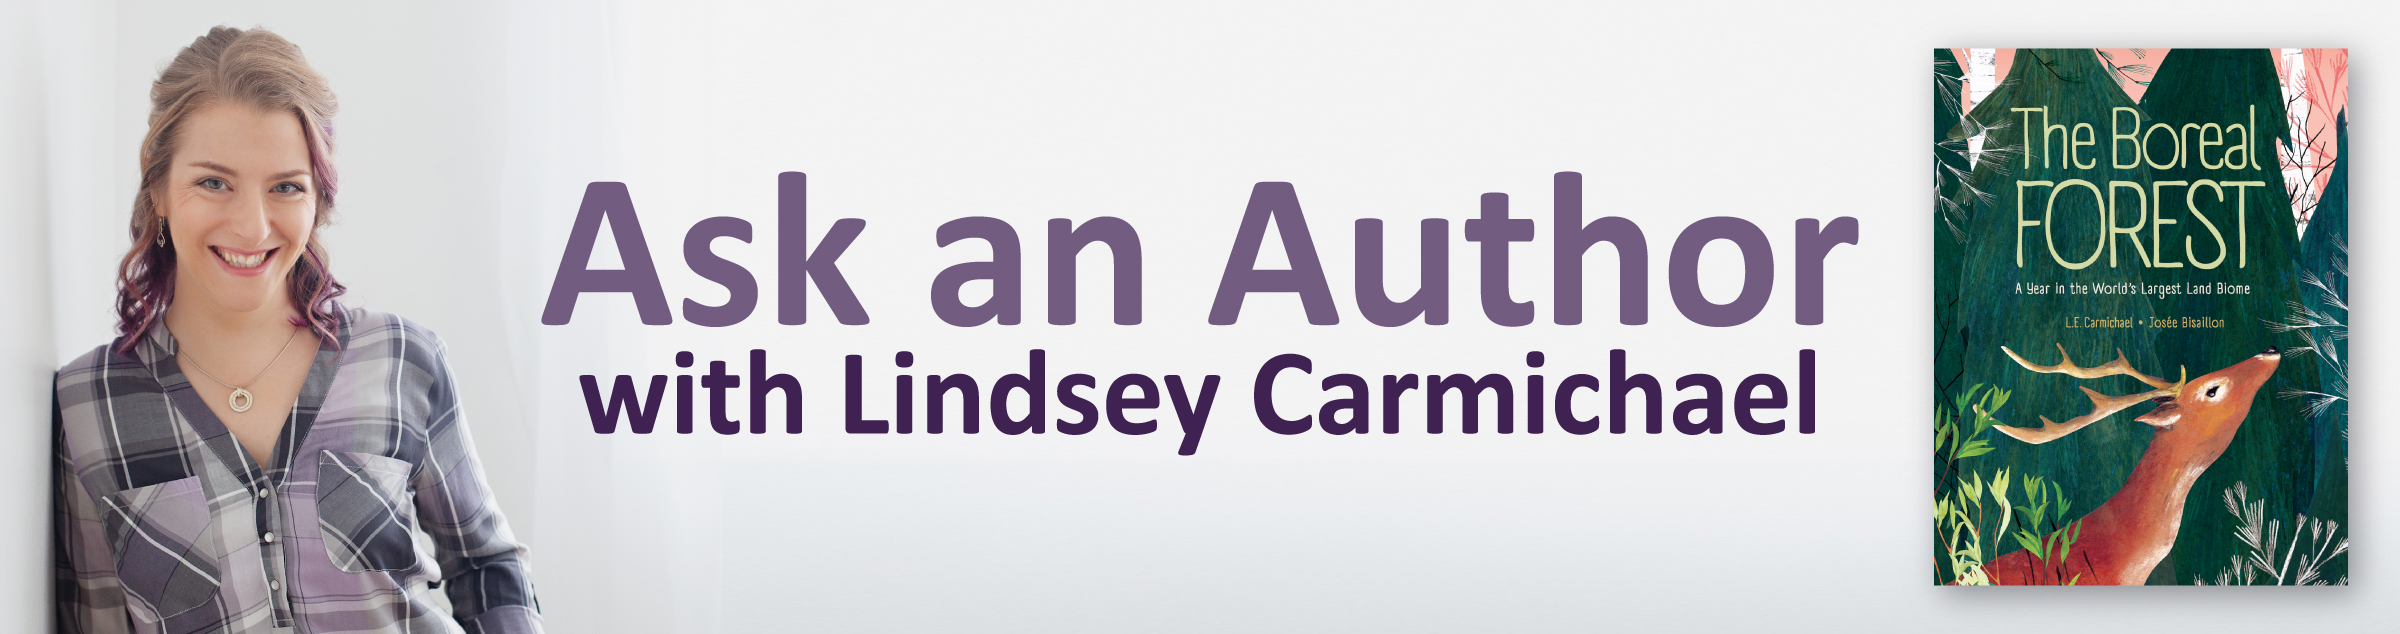 Ask an Author with Lindsey Carmichael